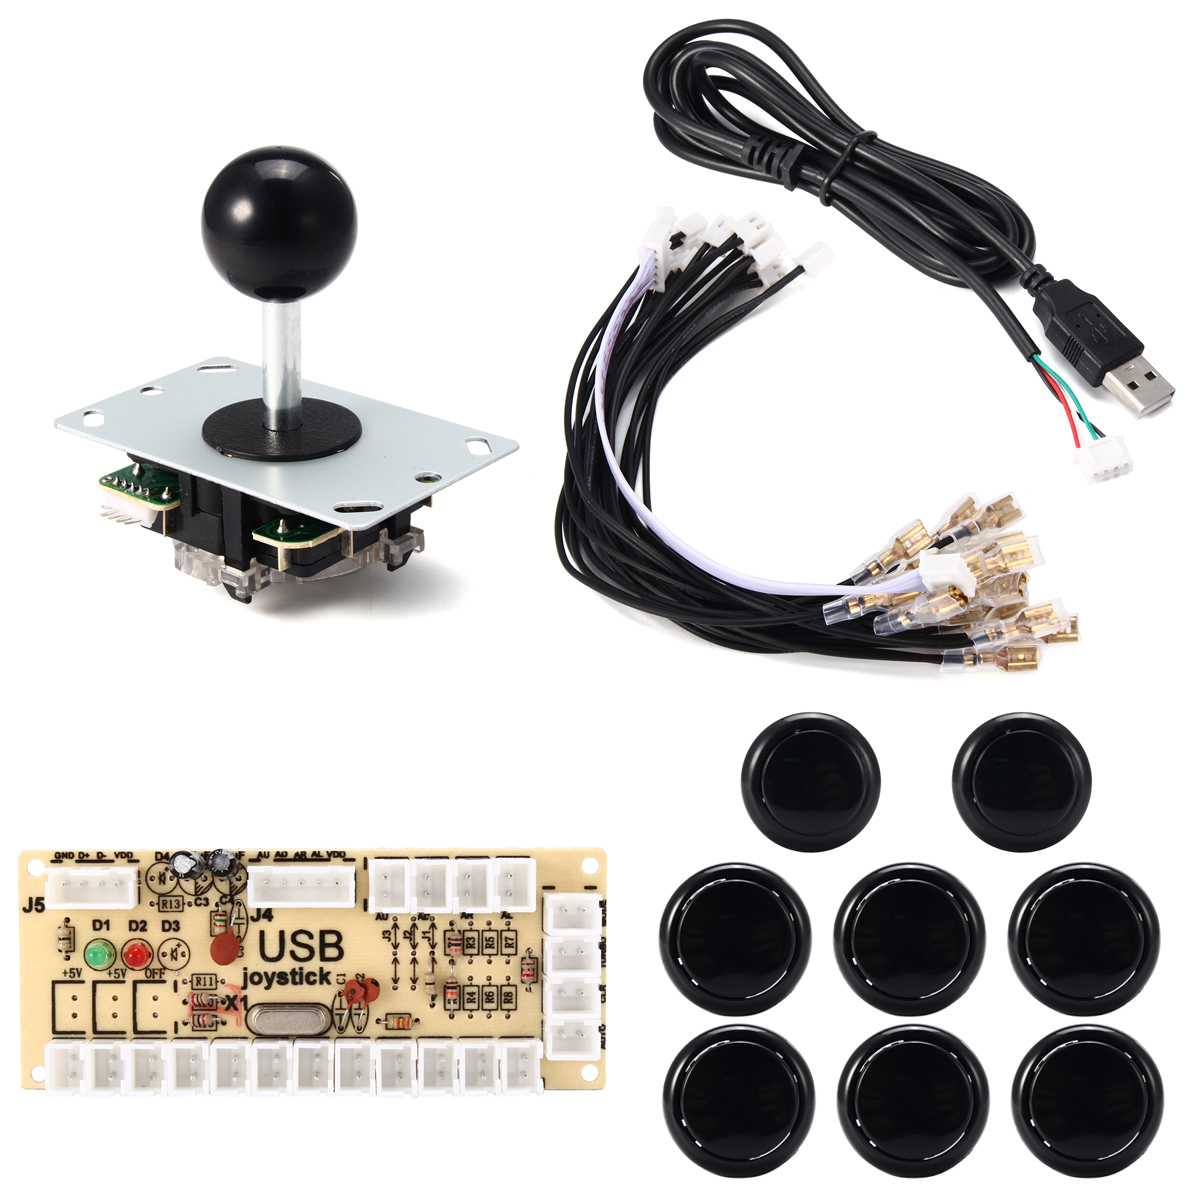 Joystick Push Button Game Controller DIY Kit for Arcade Fighting Video Game PC 12